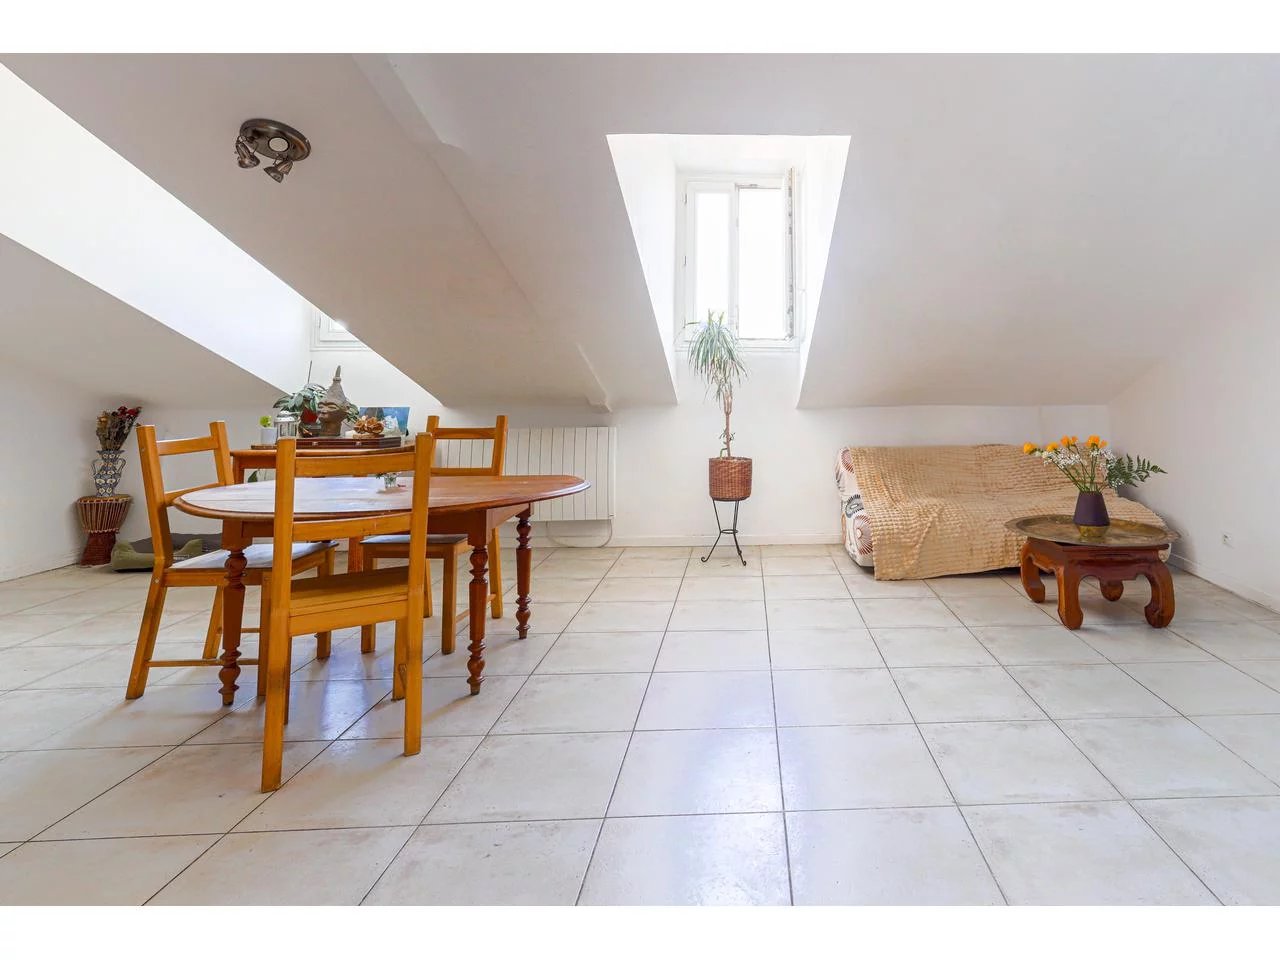 Appartement  4 Rooms 61m2  for sale   470 000 €